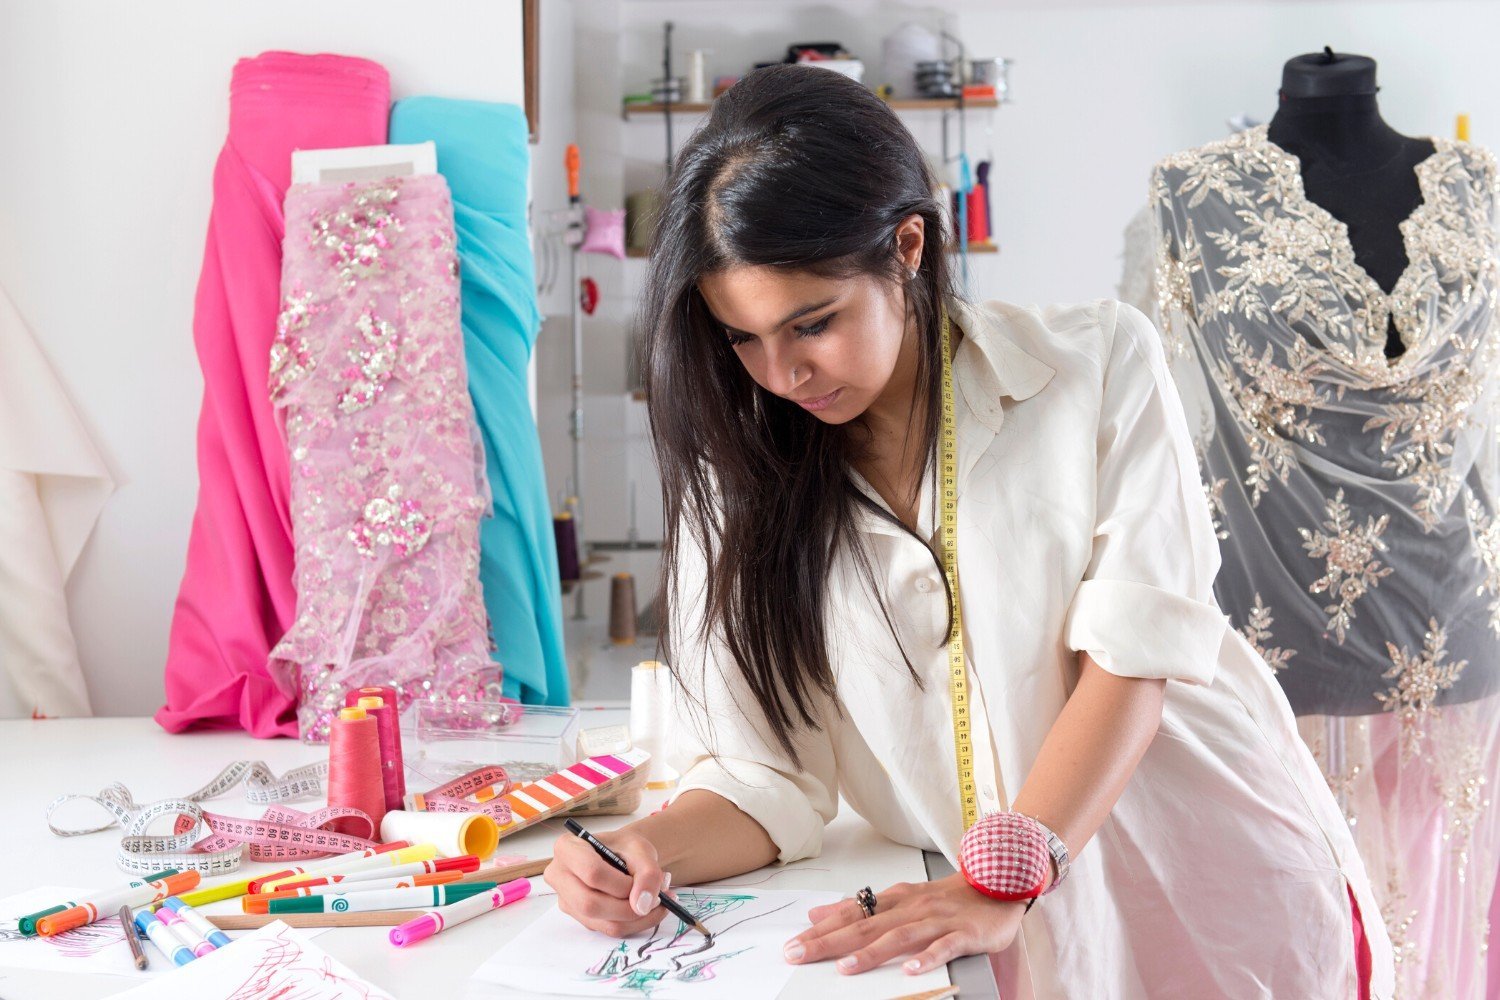 330 Questions to Ask a Fashion Designer